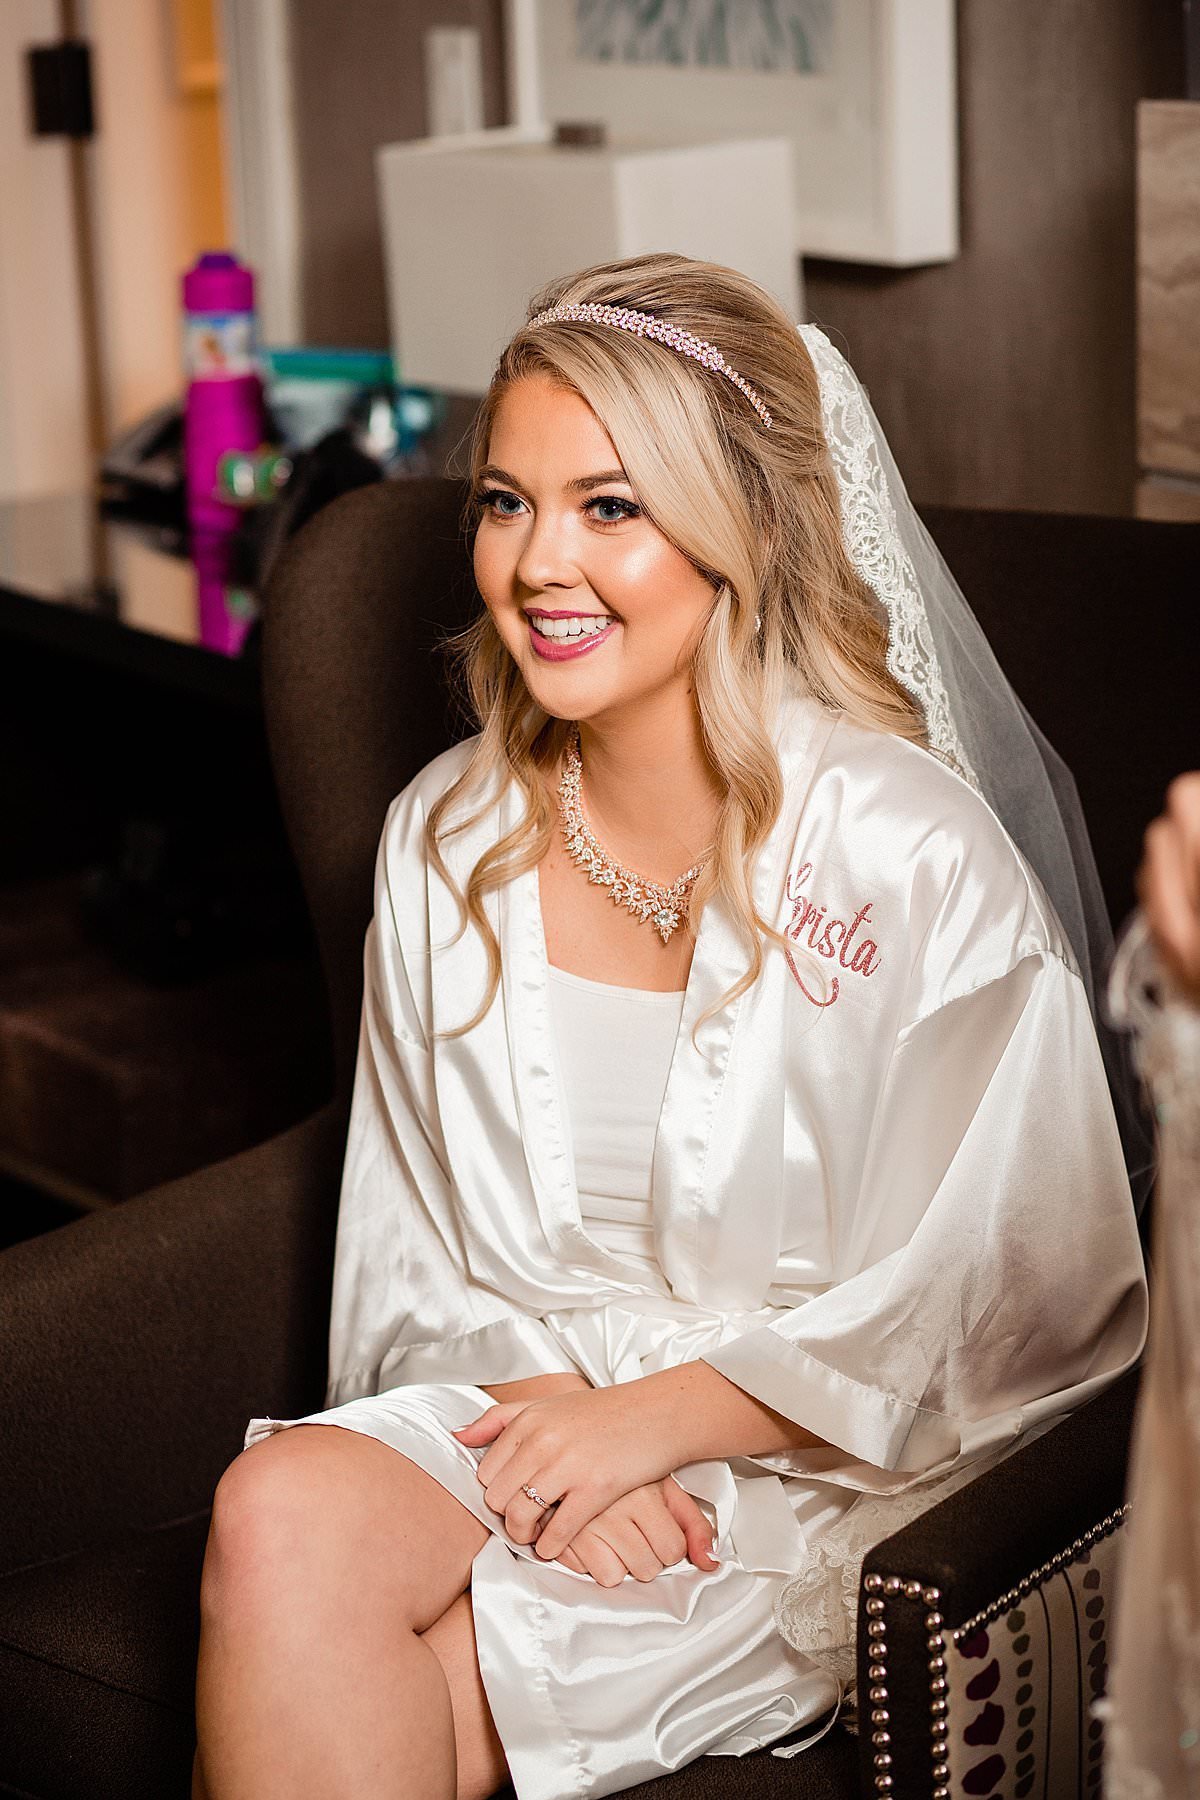 Bride wearing her custom wedding robe and veil waiting to get into dress